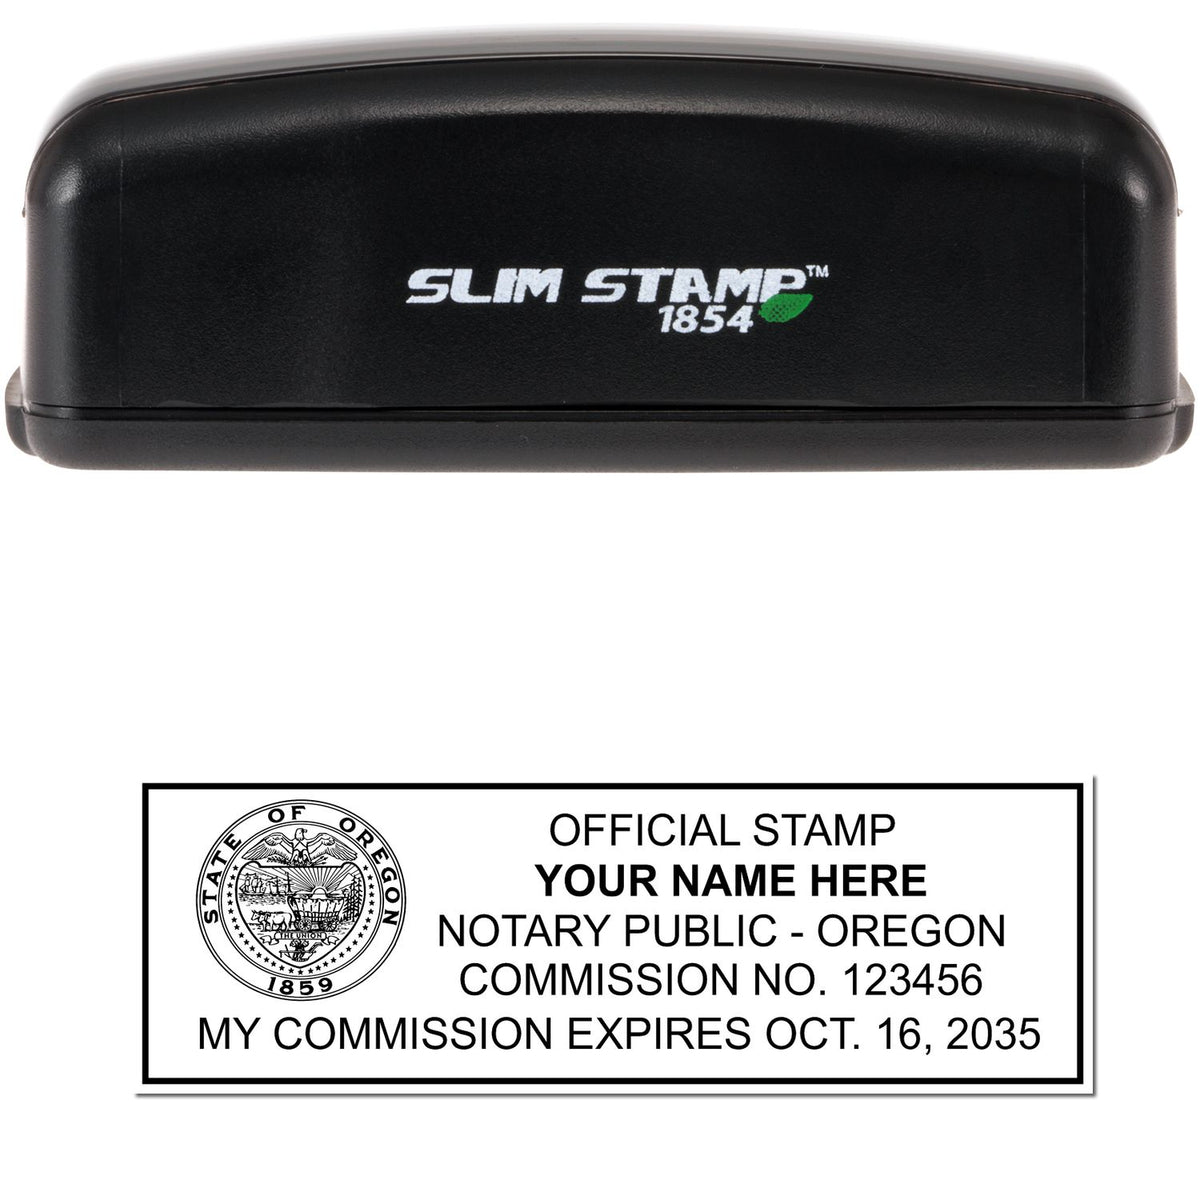 The main image for the Slim Pre-Inked Rectangular Notary Stamp for Oregon depicting a sample of the imprint and electronic files